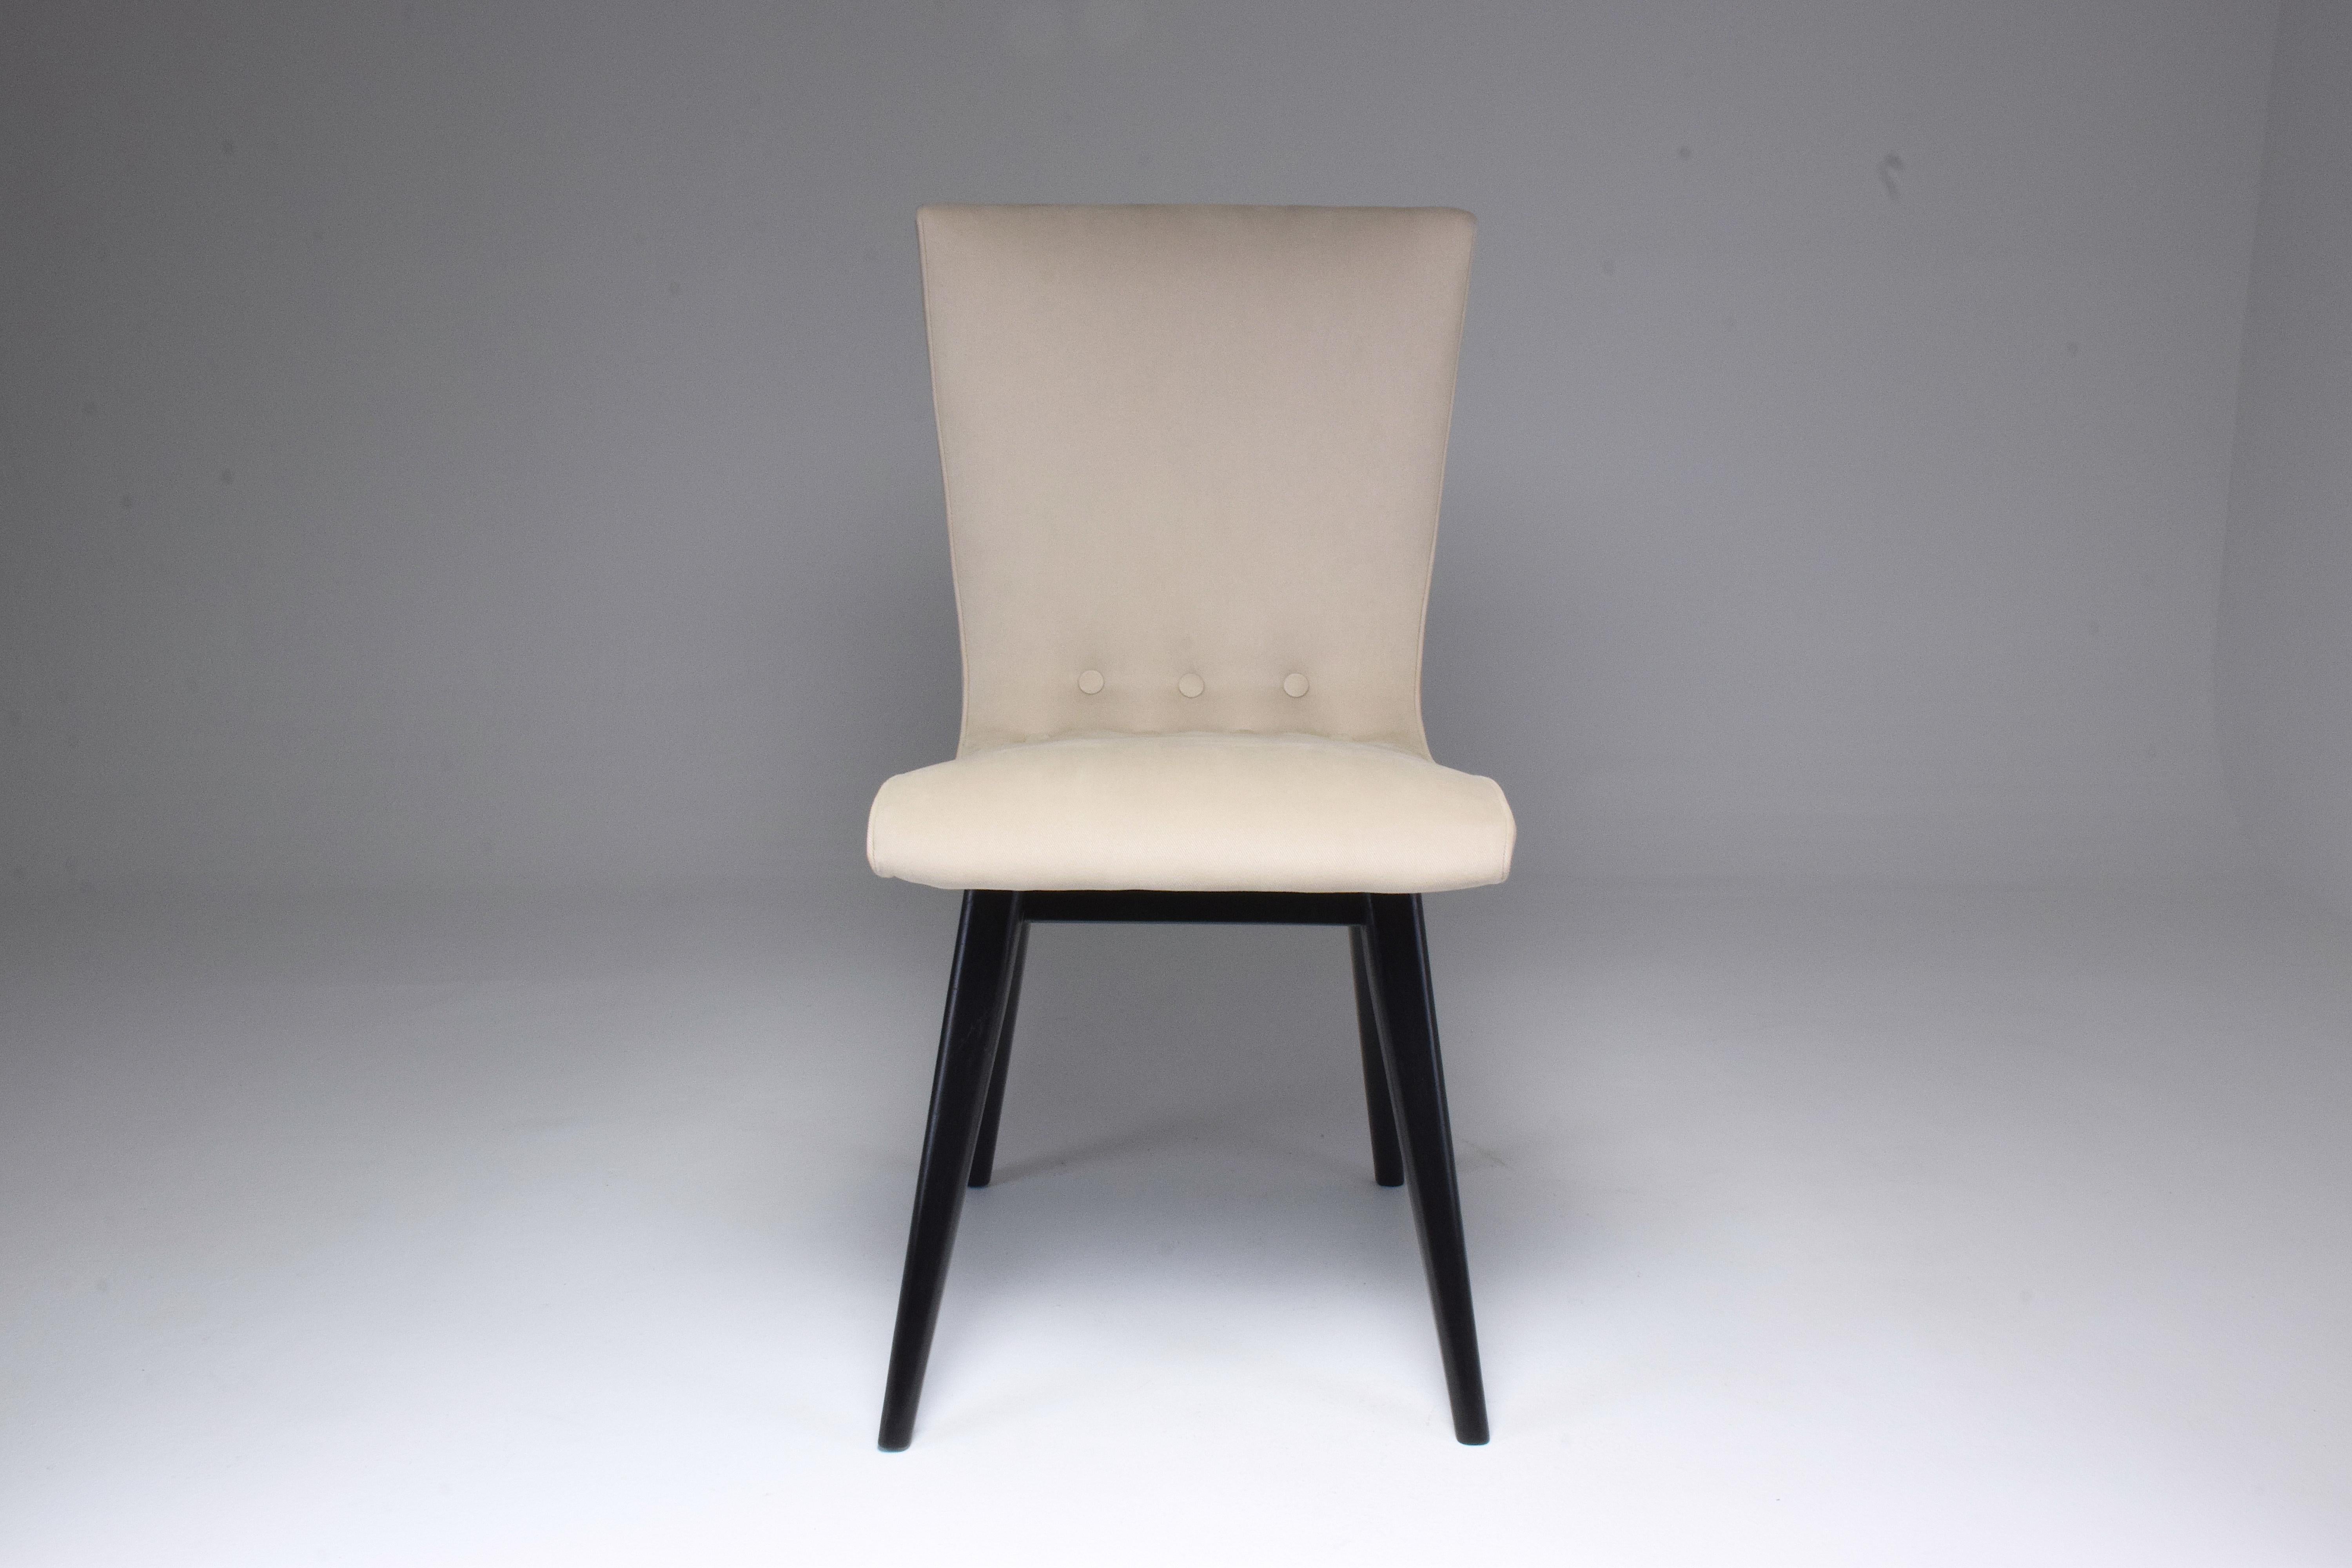 Mid-20th Century Midcentury Scandinavian Dining Chairs by CJ Van Os Culemborg, Set of Four, 1950s